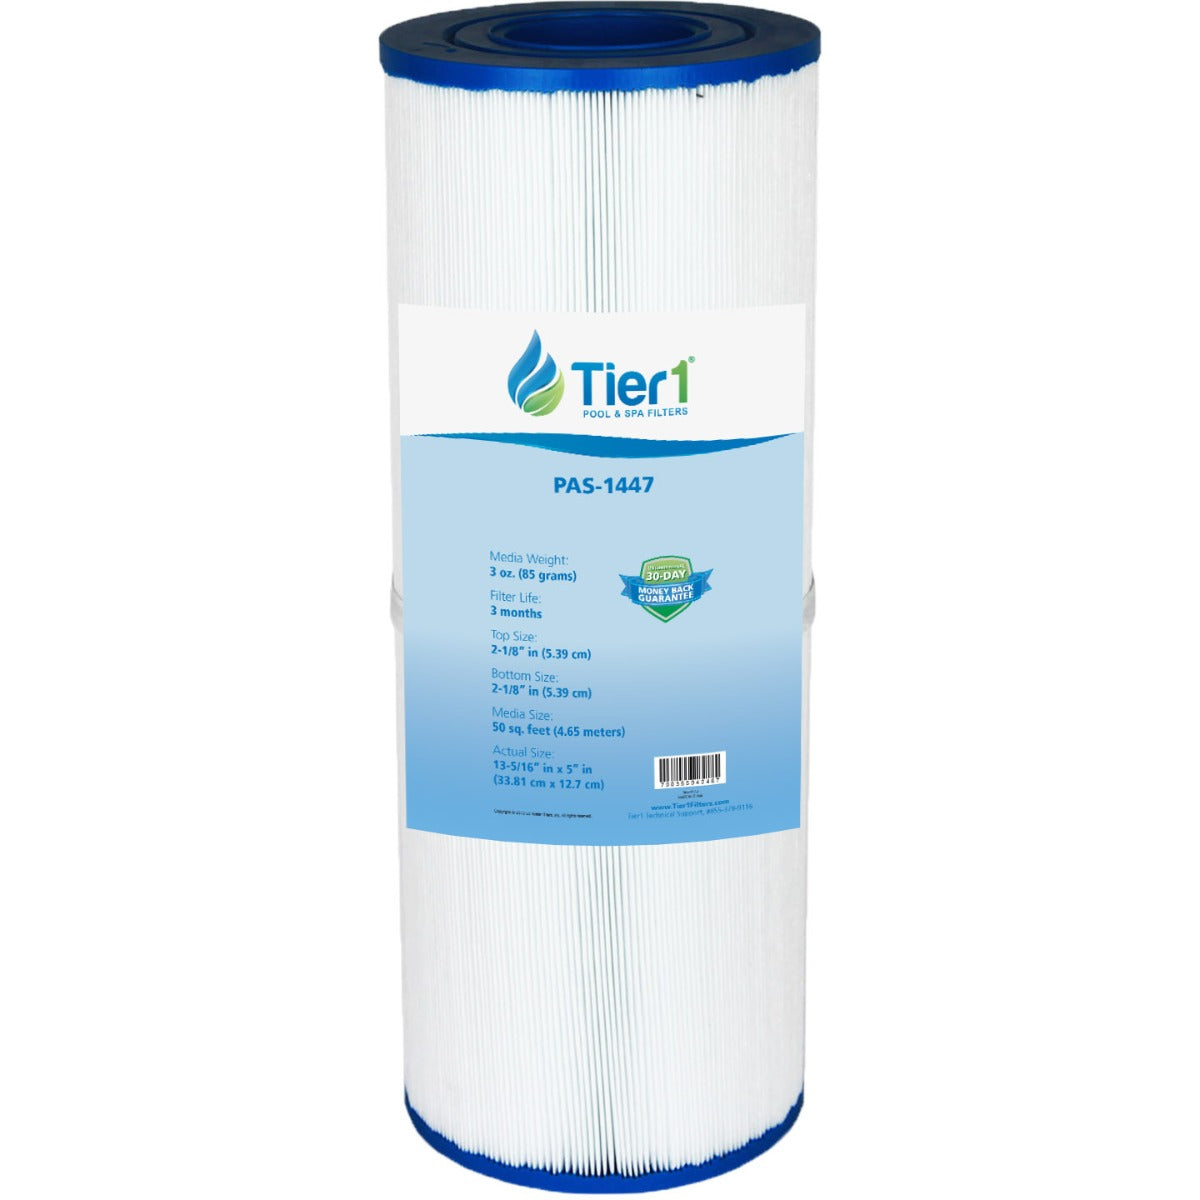 Tier1 Brand Replacement Pool and Spa Filter for 03FIL1600